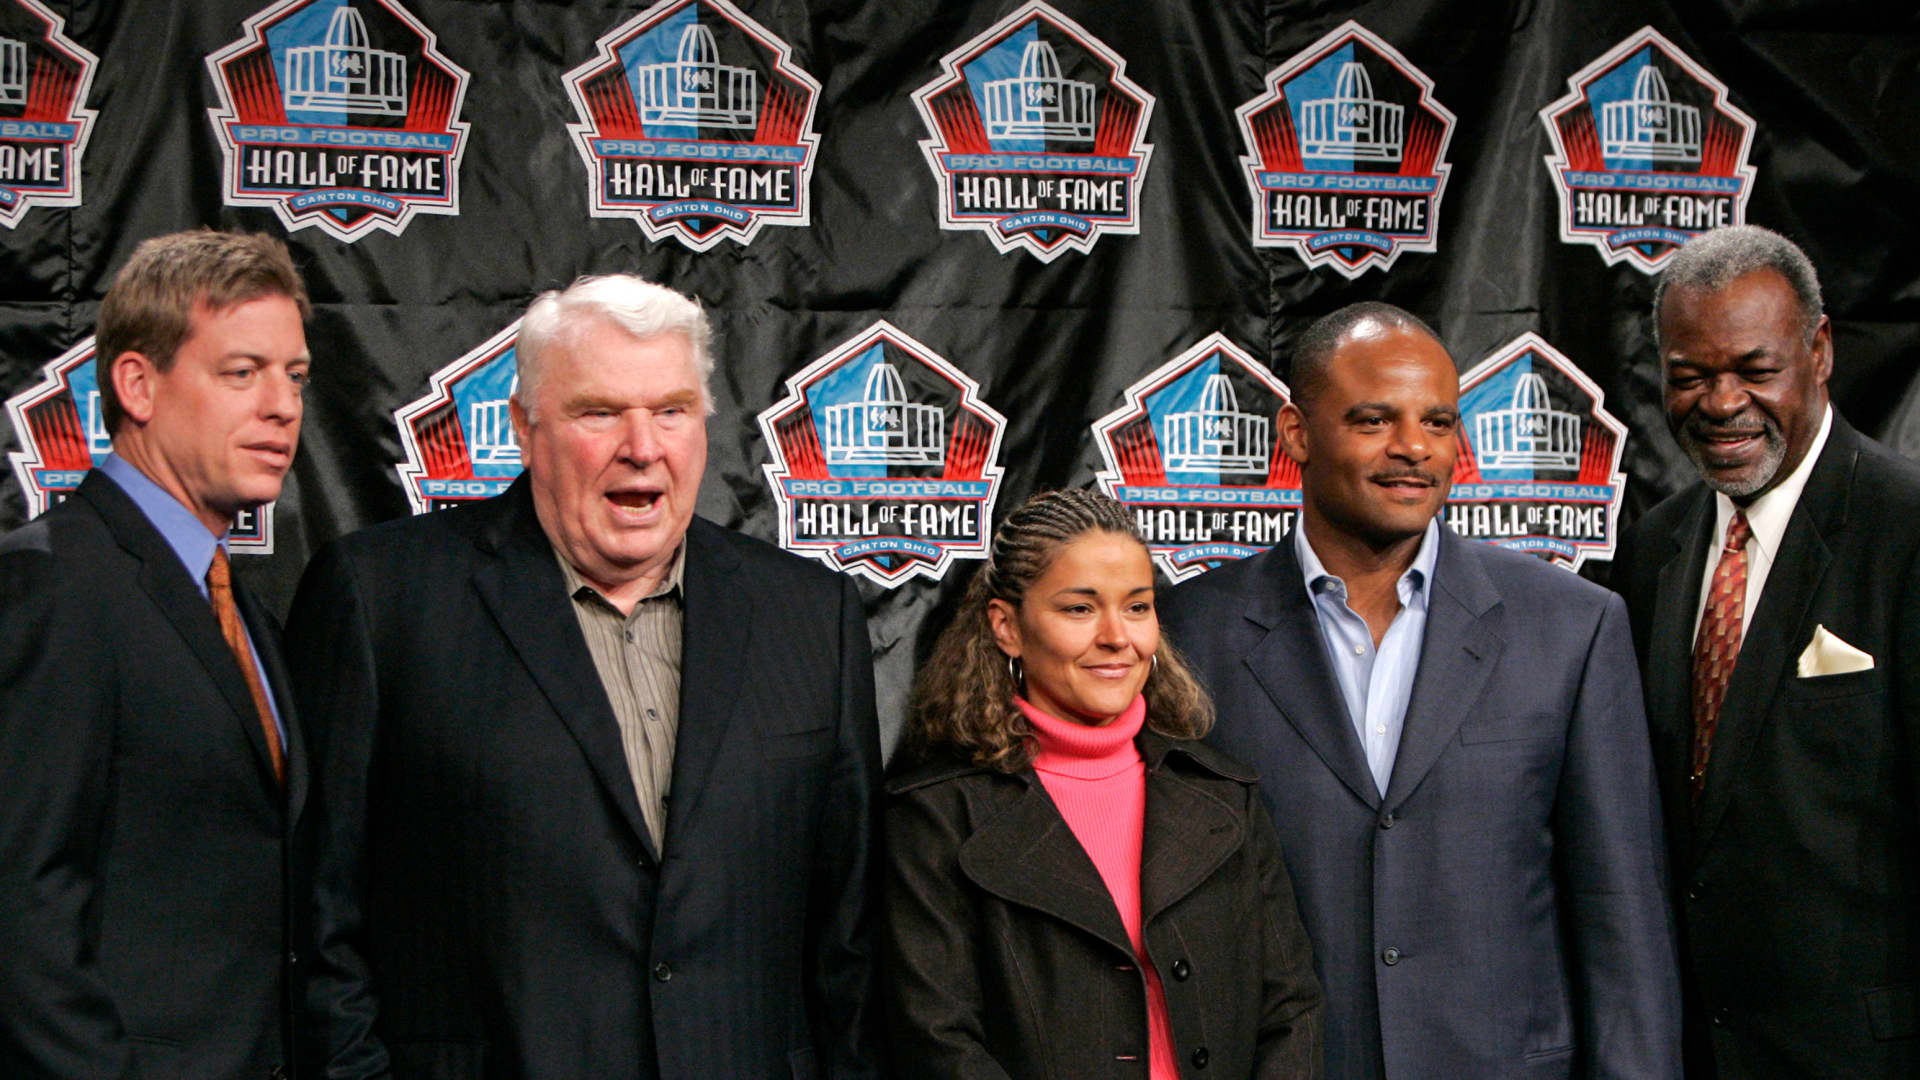 Newly inducted members of the NFL Hall of Fame stand after a news conference in Detroit, Michigan February 4, 2006. (L to R) Former quarterback of the Dallas Cowboys Troy Aikman, former Oakland Raiders coach John Madden, Sara White, the wife of former Green Bay Packer Reggie White, former quarterback of the Houston Oilers Warren Moon and Rayfield Wright of the Dallas Cowboys.